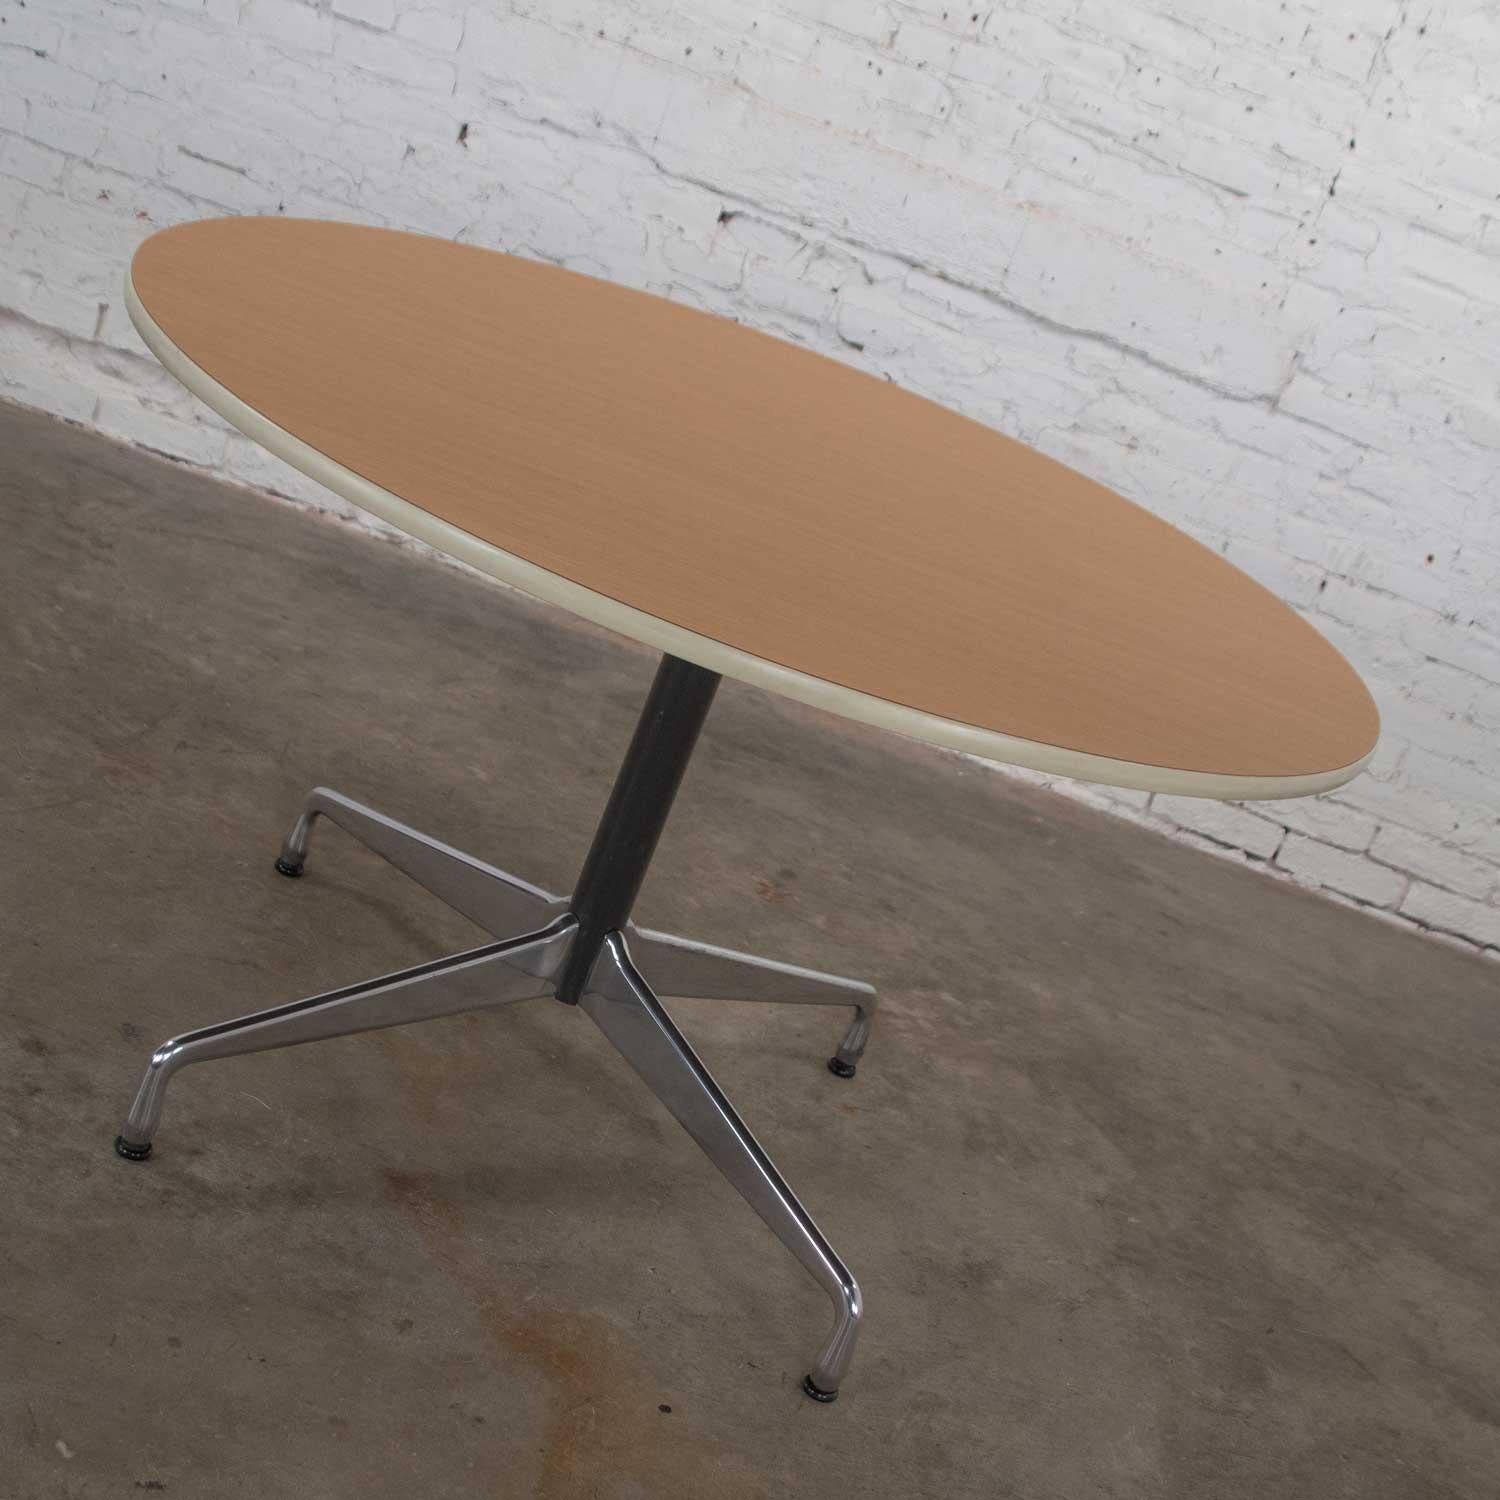 Renowned Eames Herman Miller round table with the universal base and a wood grain laminate top with off white edge trim, black painted shaft, and polished aluminum base. Wonderful vintage condition with no outstanding flaws that we have detected.